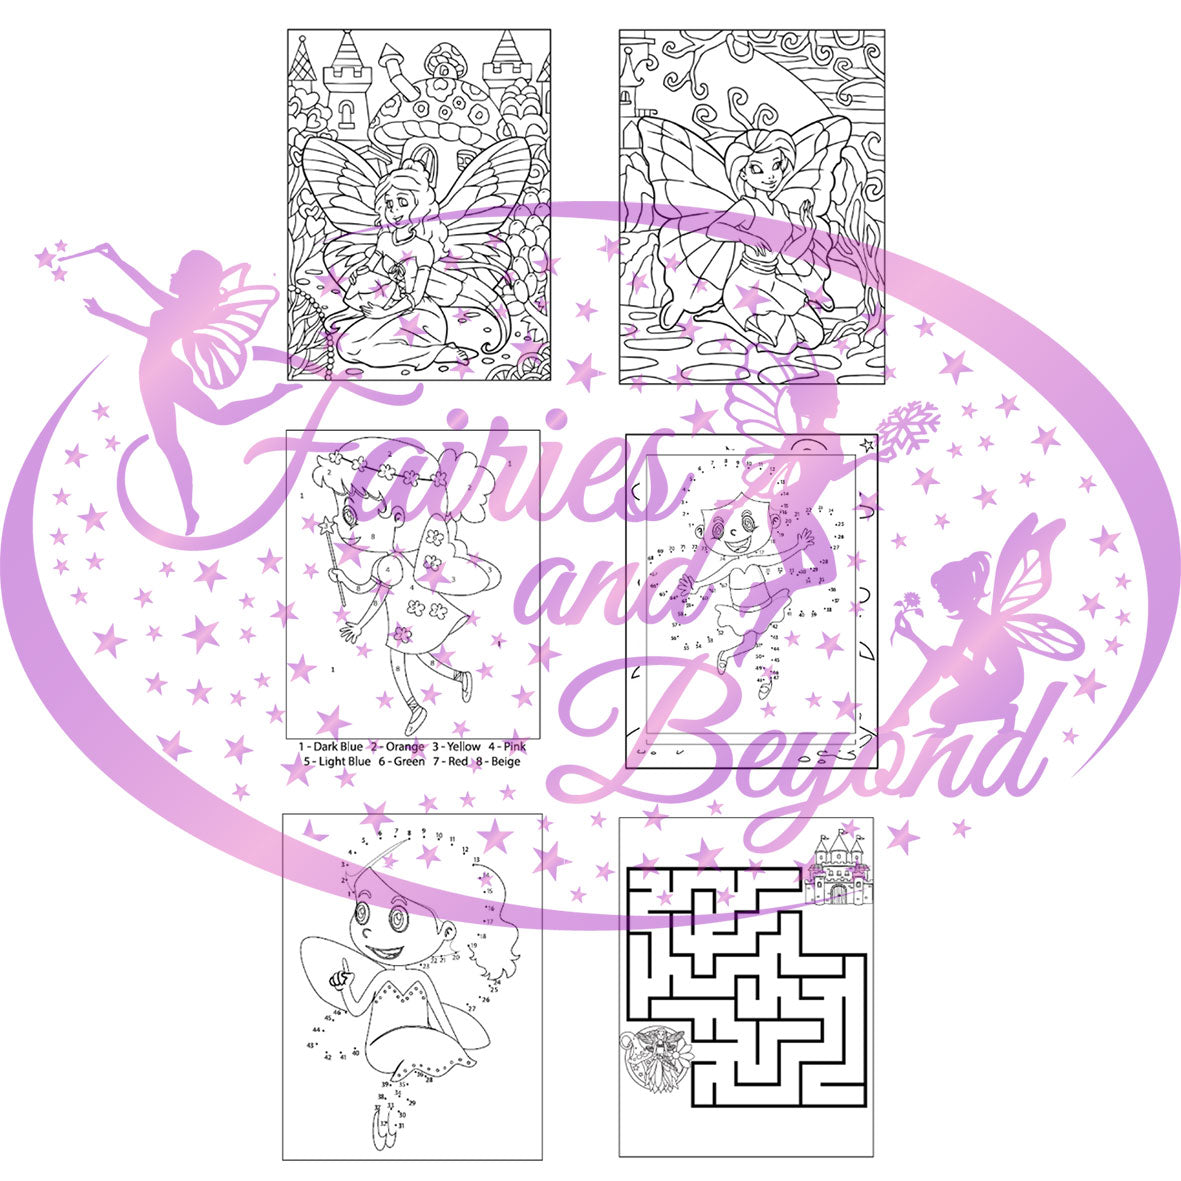 Fairies and Beyond Kids Activity eBook - Mazes, Coloring Pages, Paint By Number and Dot to Dot